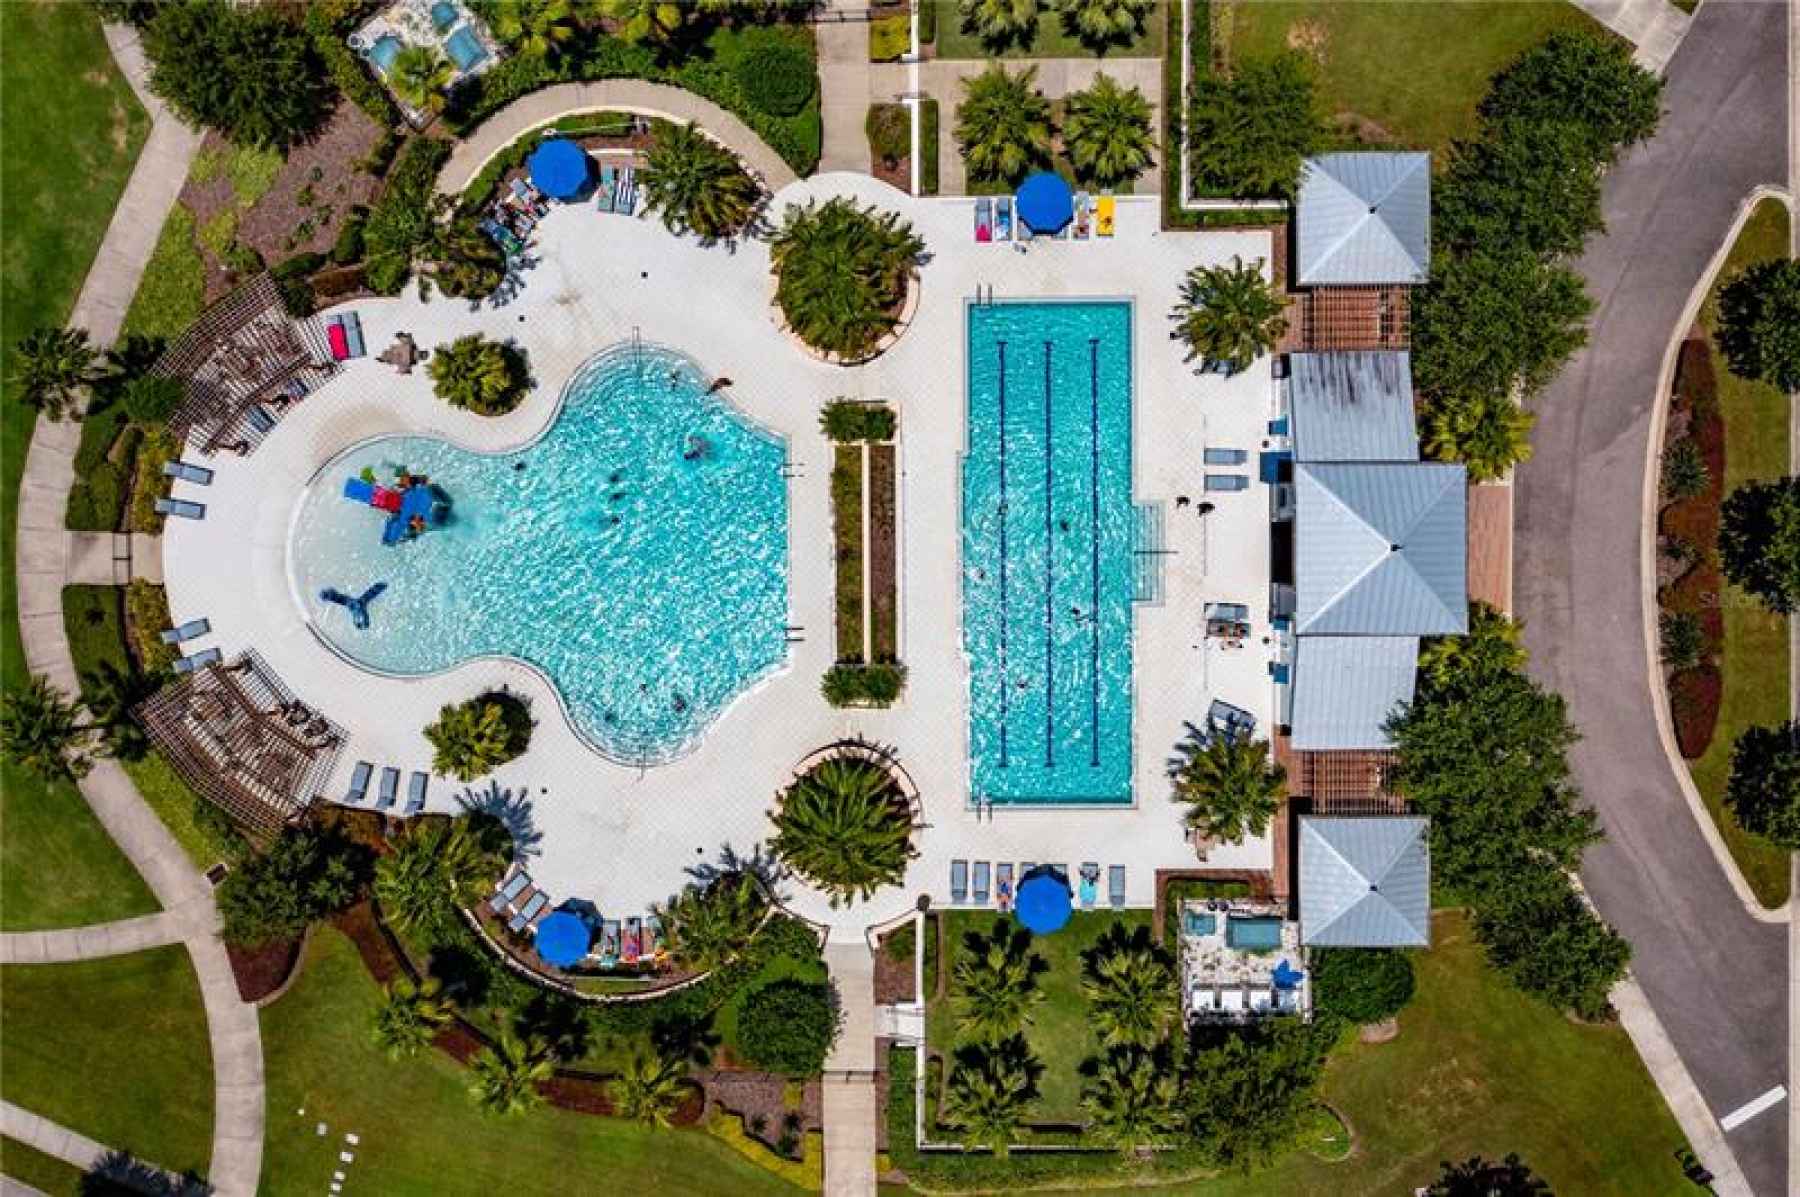 With two community pools, the kids can play in one while you swim laps in the other.